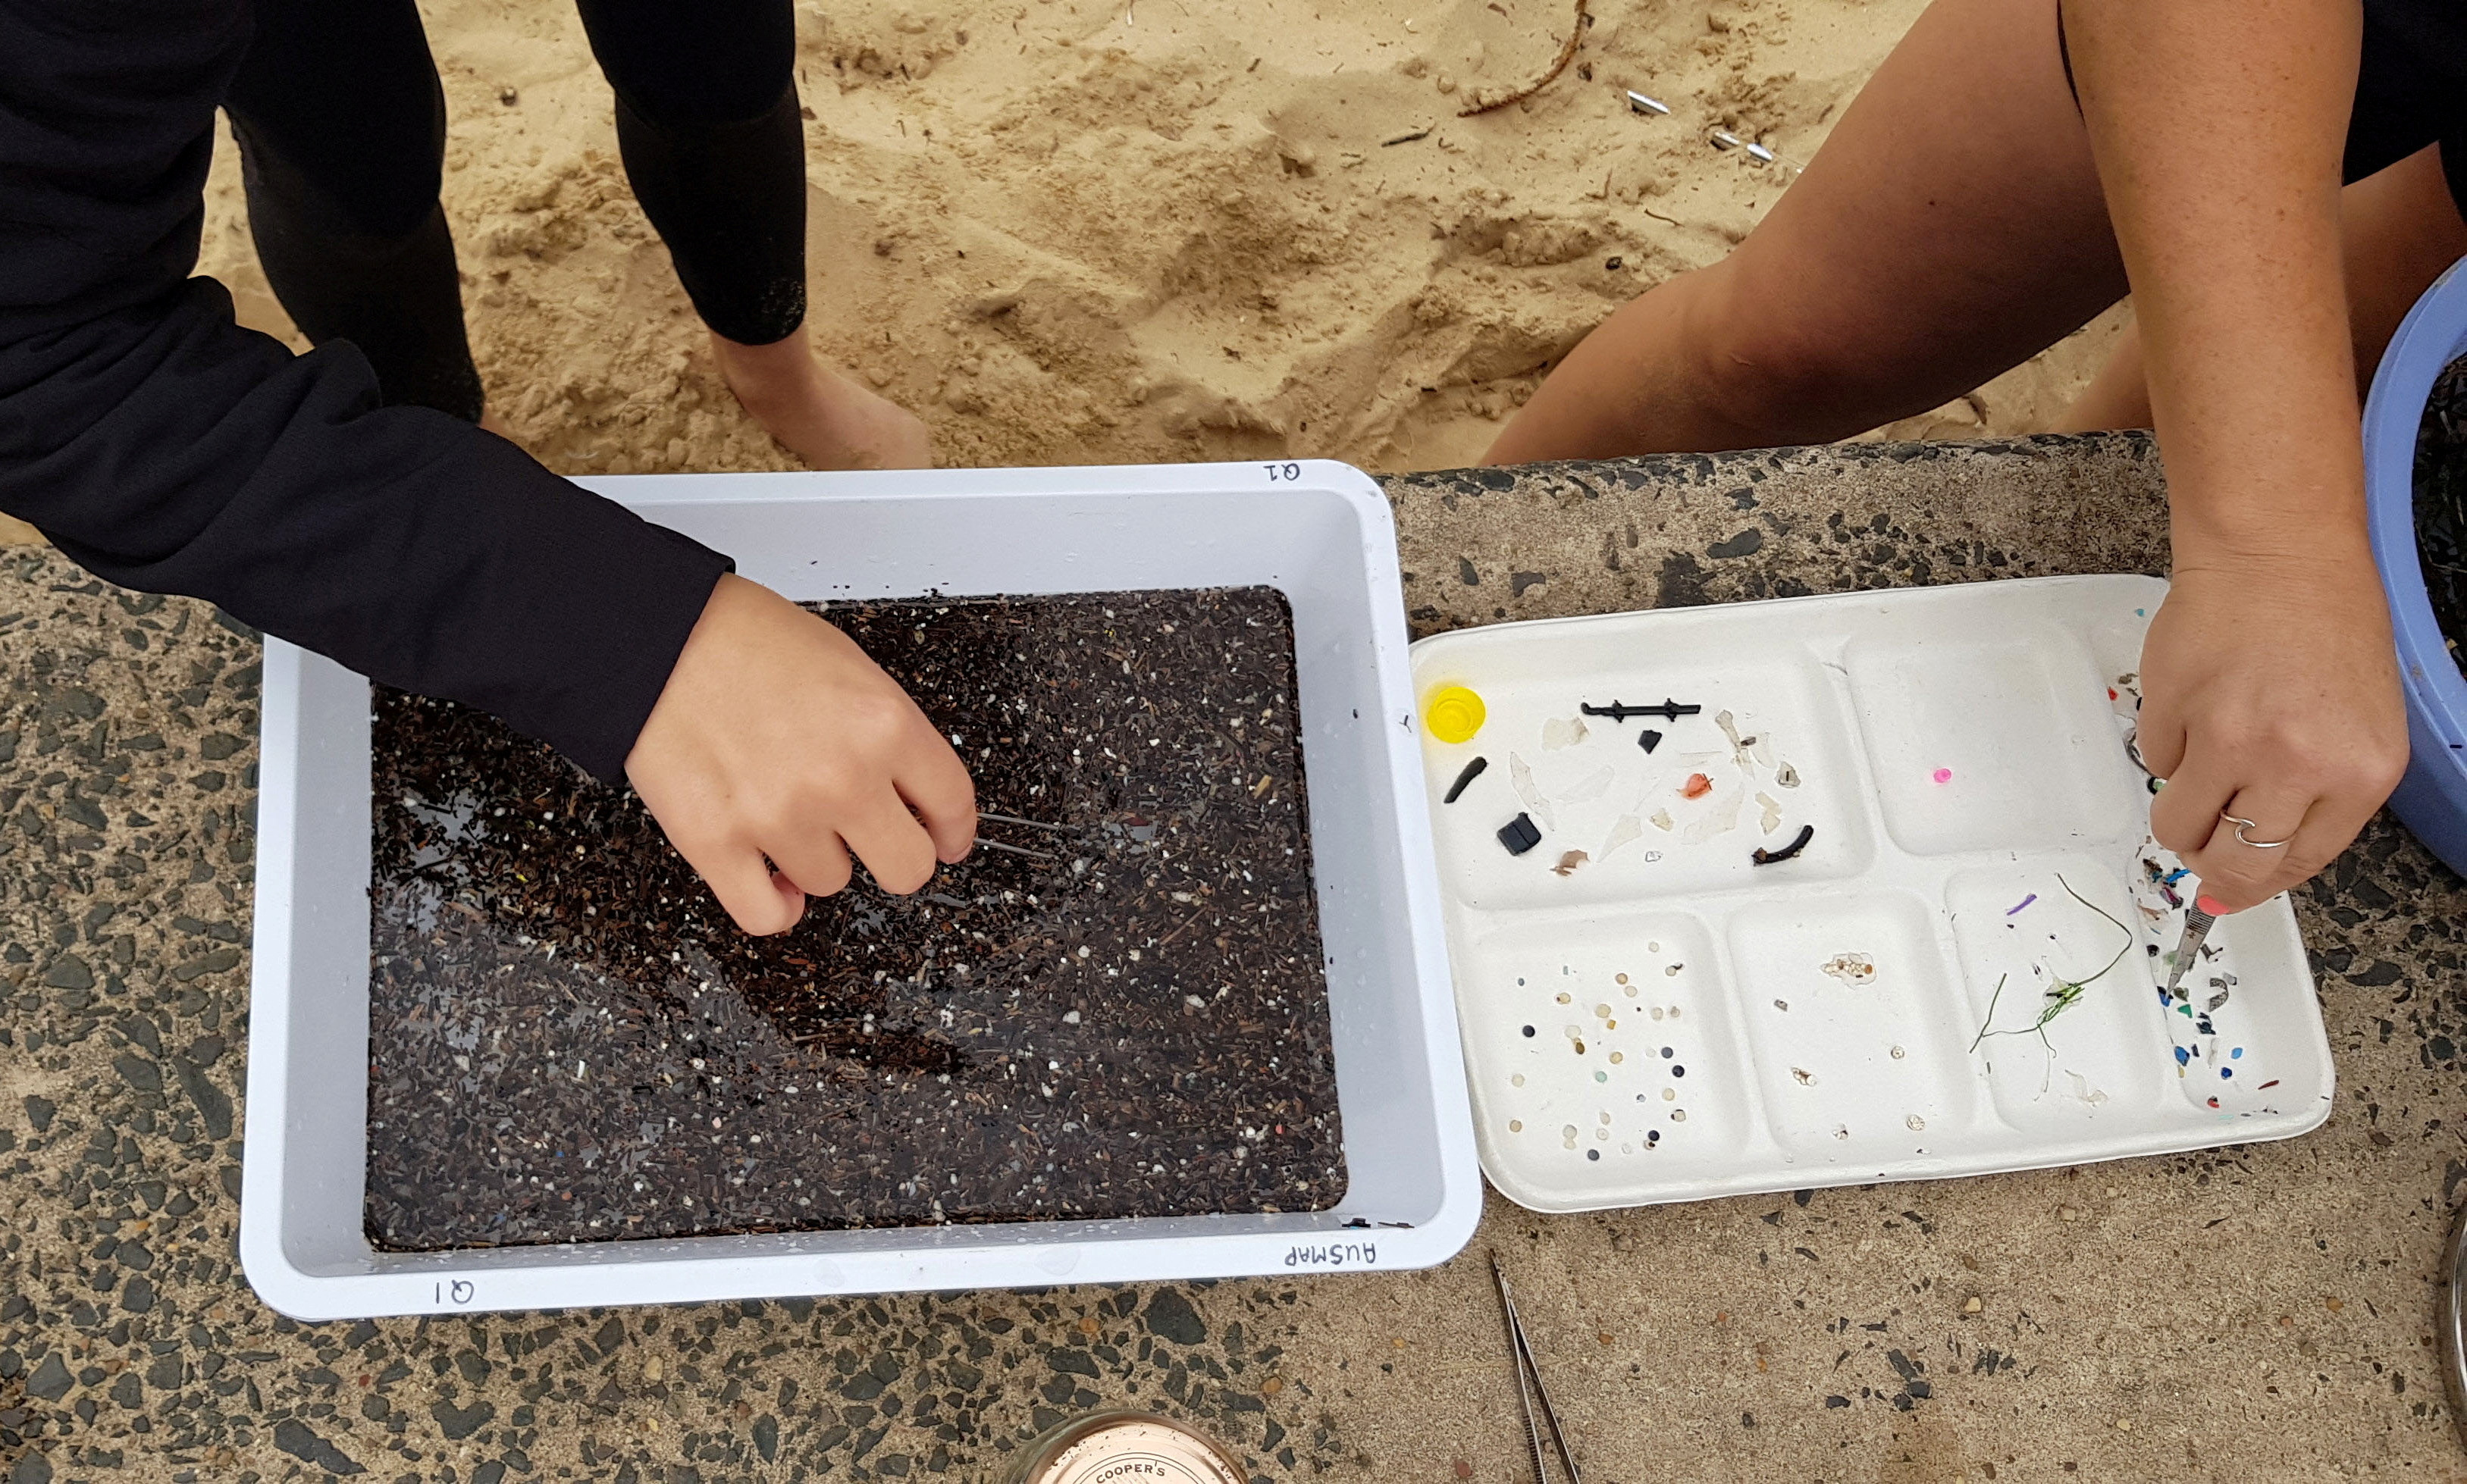 Citizen scientists use tweezers to remove microplastics from a sample to a separate container at Manly Cove Beach in Sydney